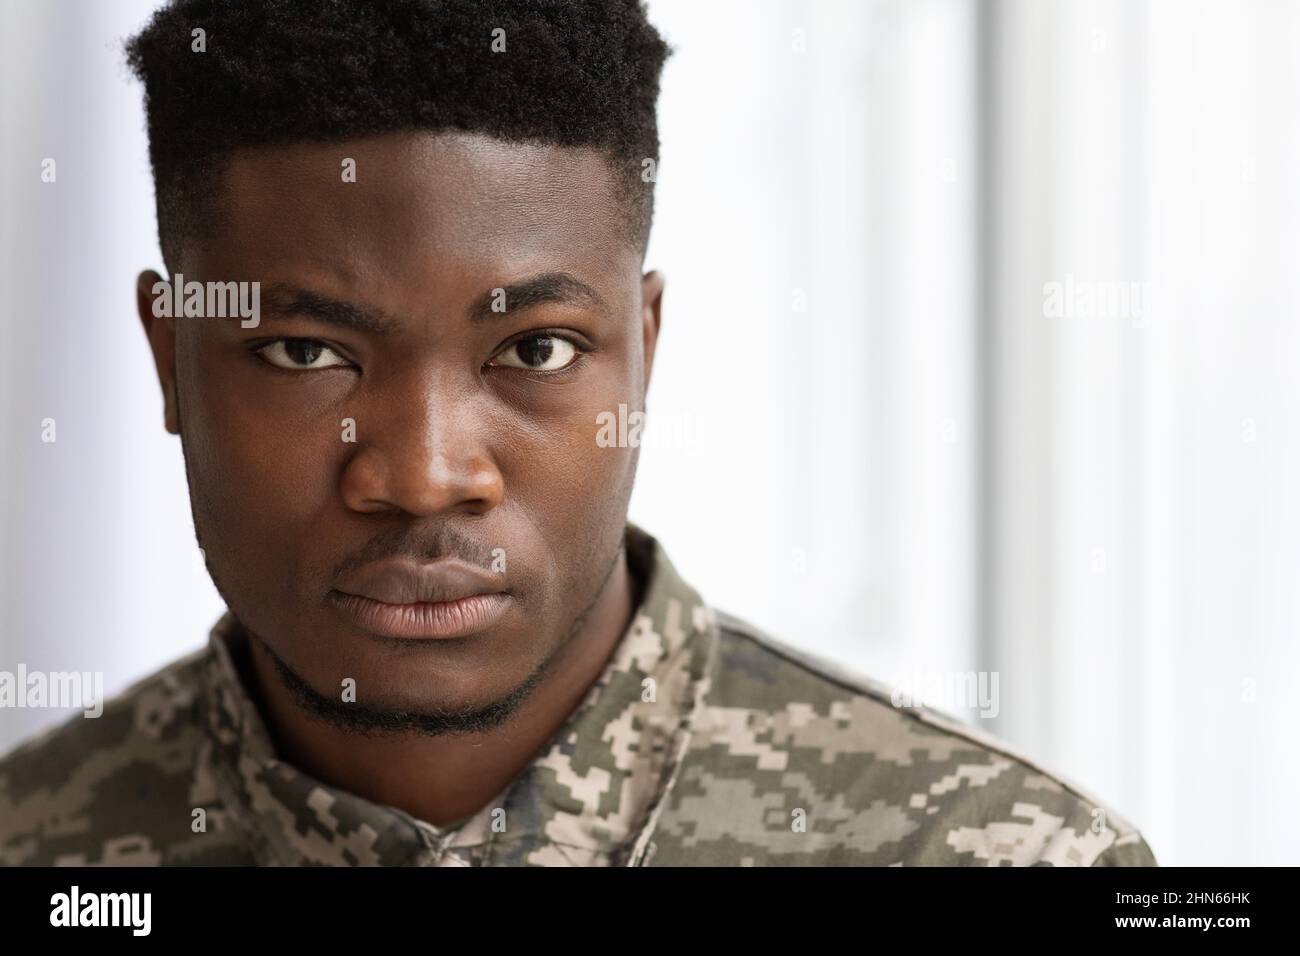 Closeup portrait of serious african american soldier looking at camera Stock Photo